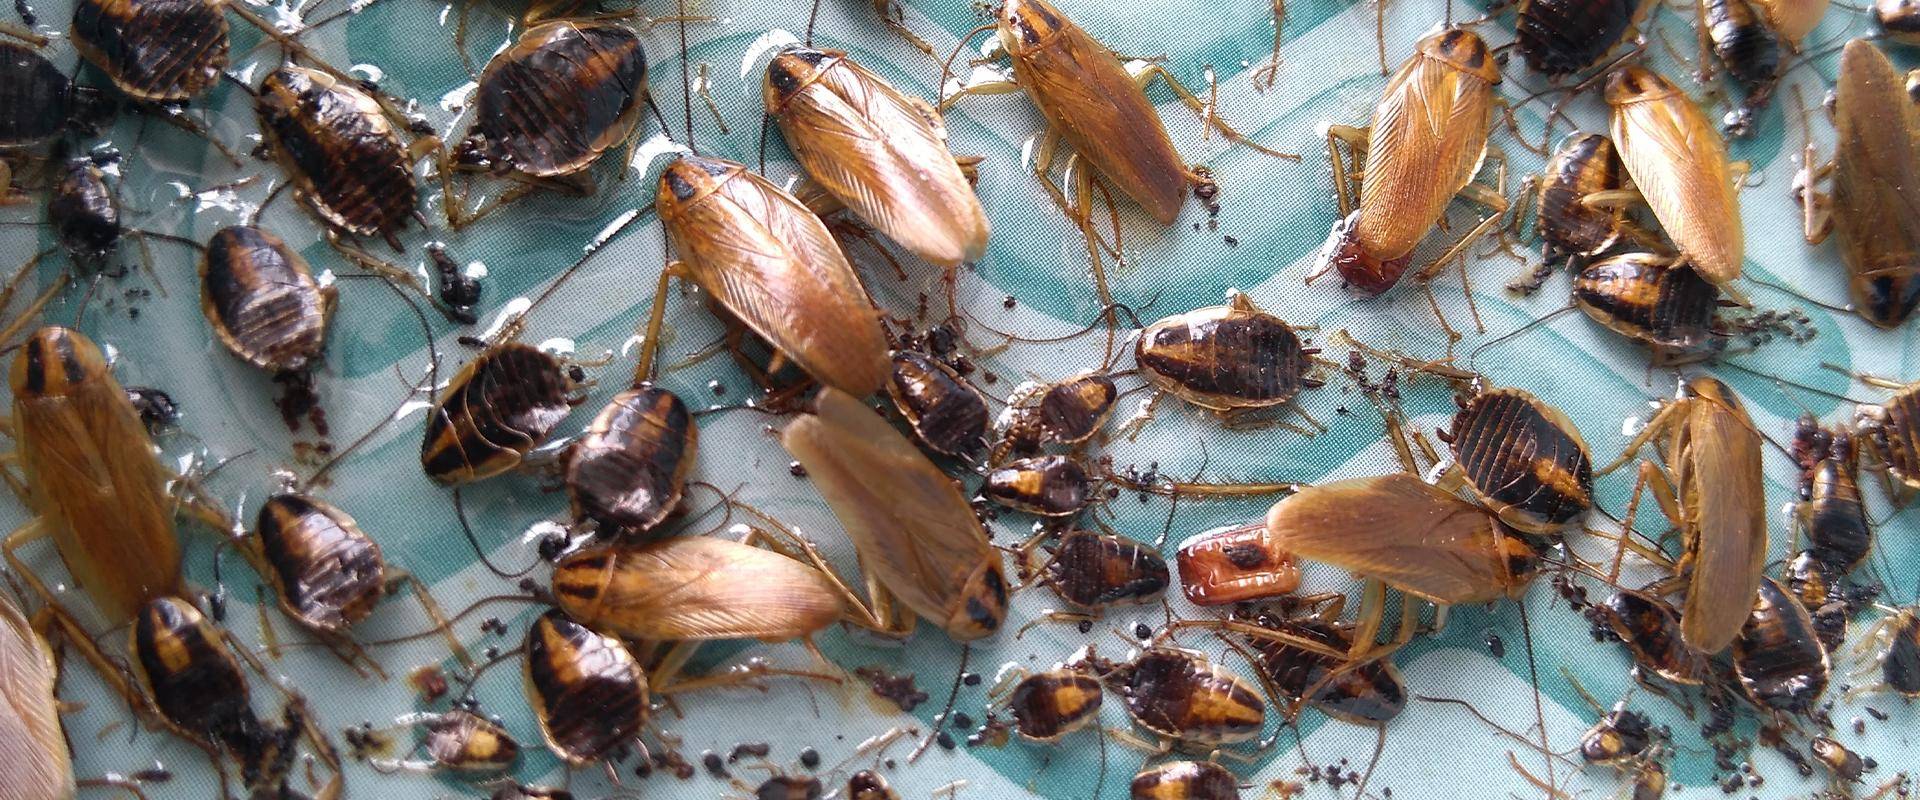 cockroaches on glue trap